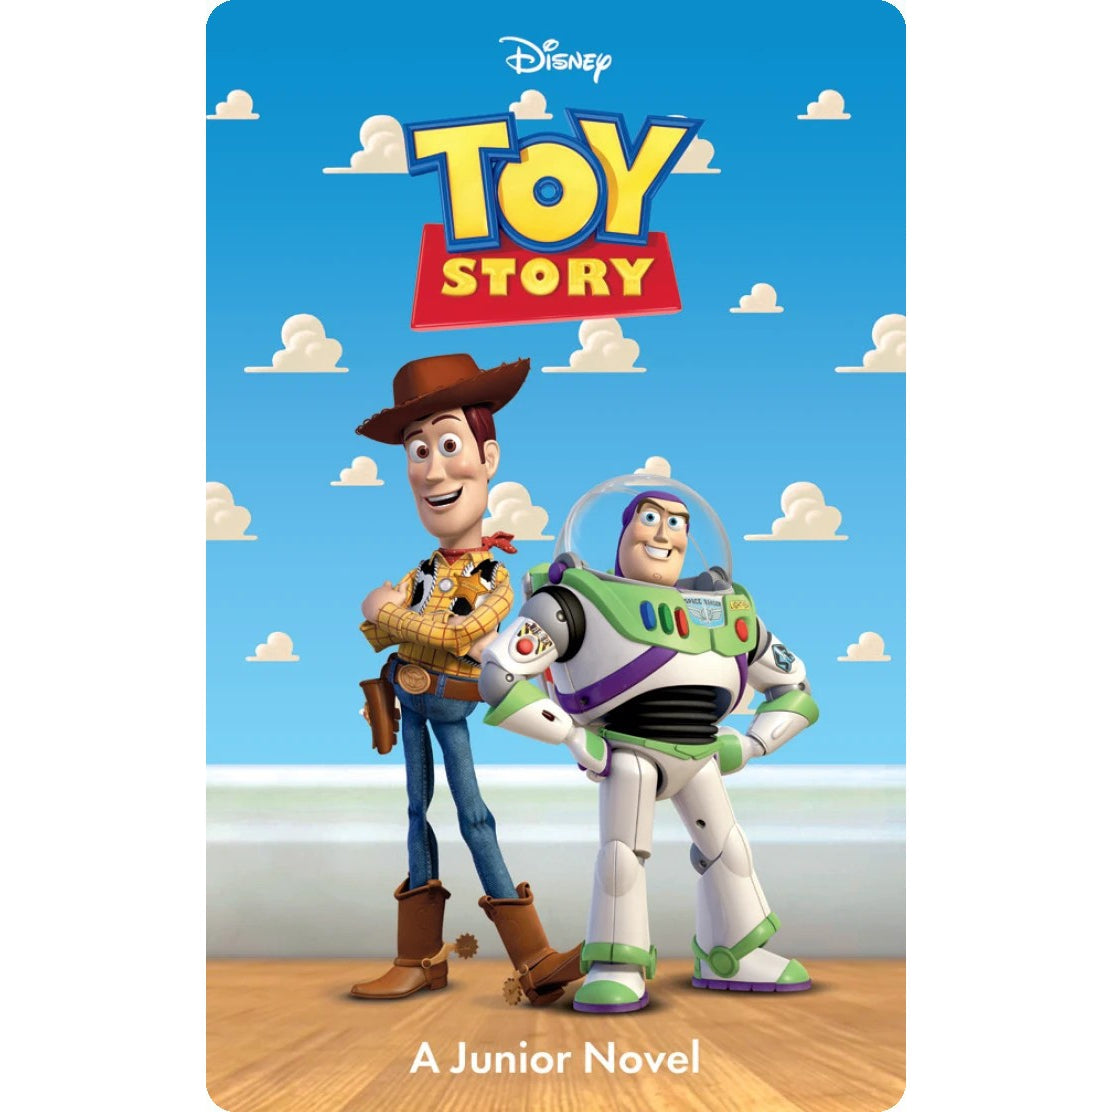 Yoto Card - Disney Toy Story - Child Friendly Audio Story Card for the Yoto Player